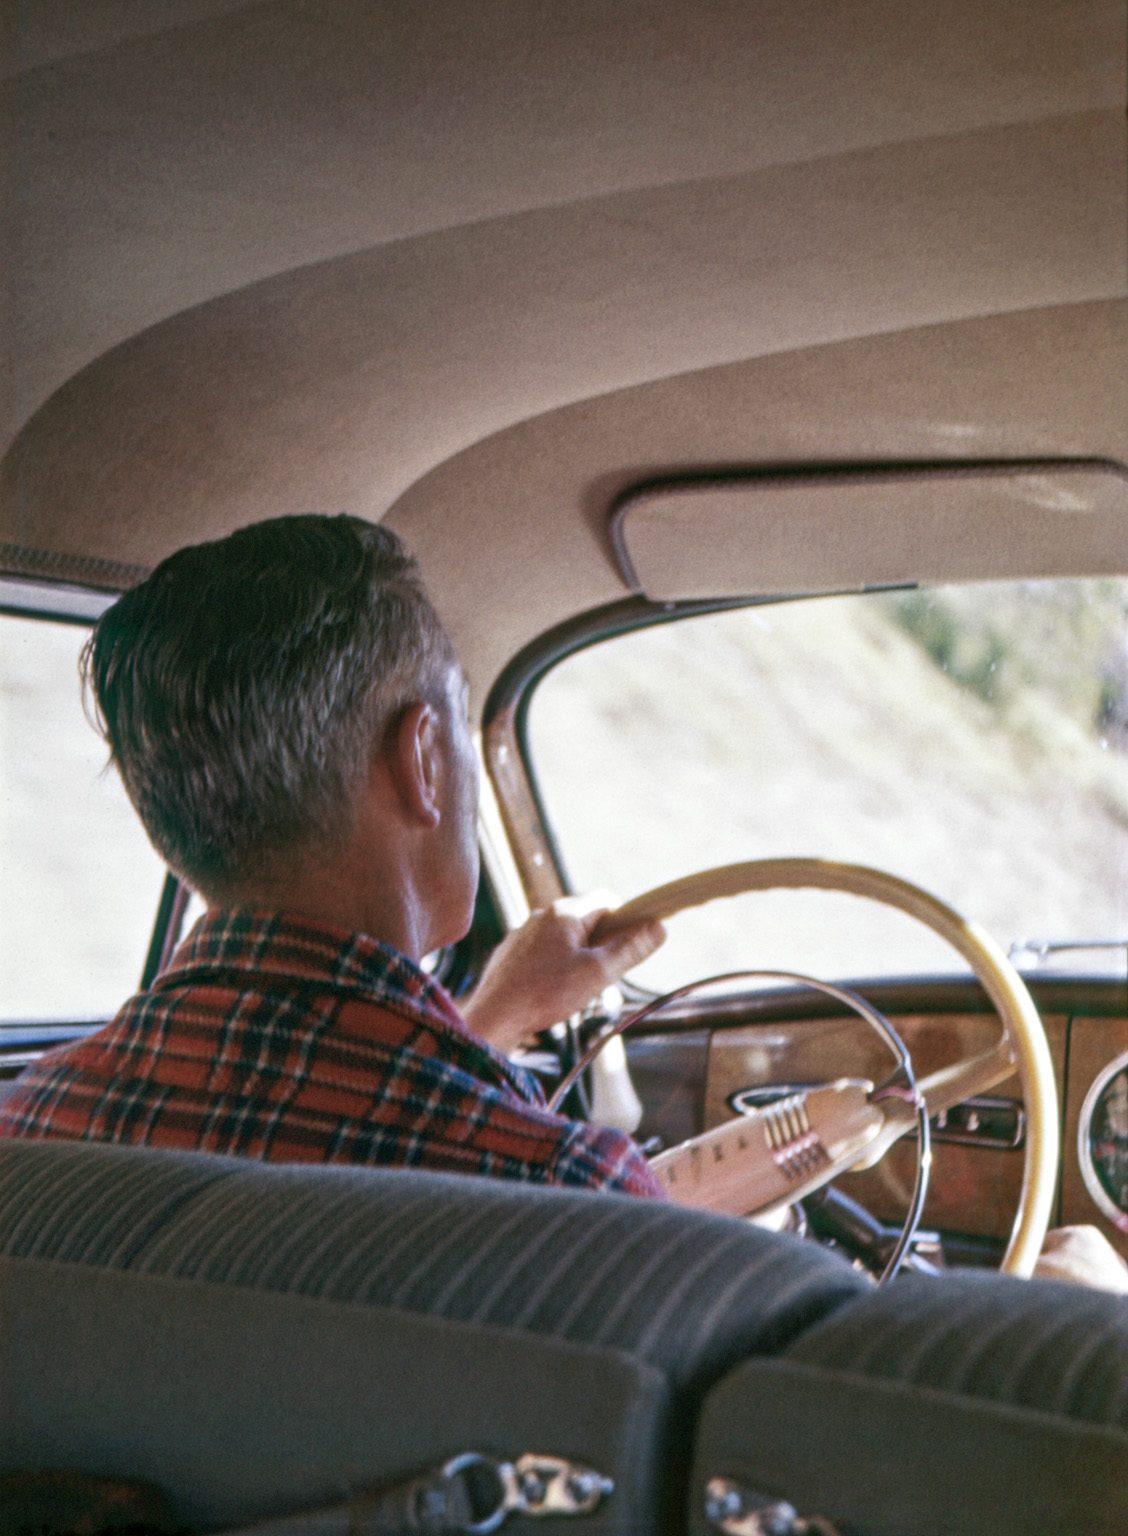 My father piloting our 1949 1948 Hudson. Looks like he's in the midst of shifting. Dig that cool steering wheel and faux-woodgrain dash. Removing the slide from the mount for scanning revealed the appendages on the backs of the front seats, which I'd forgotten about. In fact, I'm still hazy about what they were; the one on the left looks like it's holding something. My brother's Ektachrome slide. View full size.